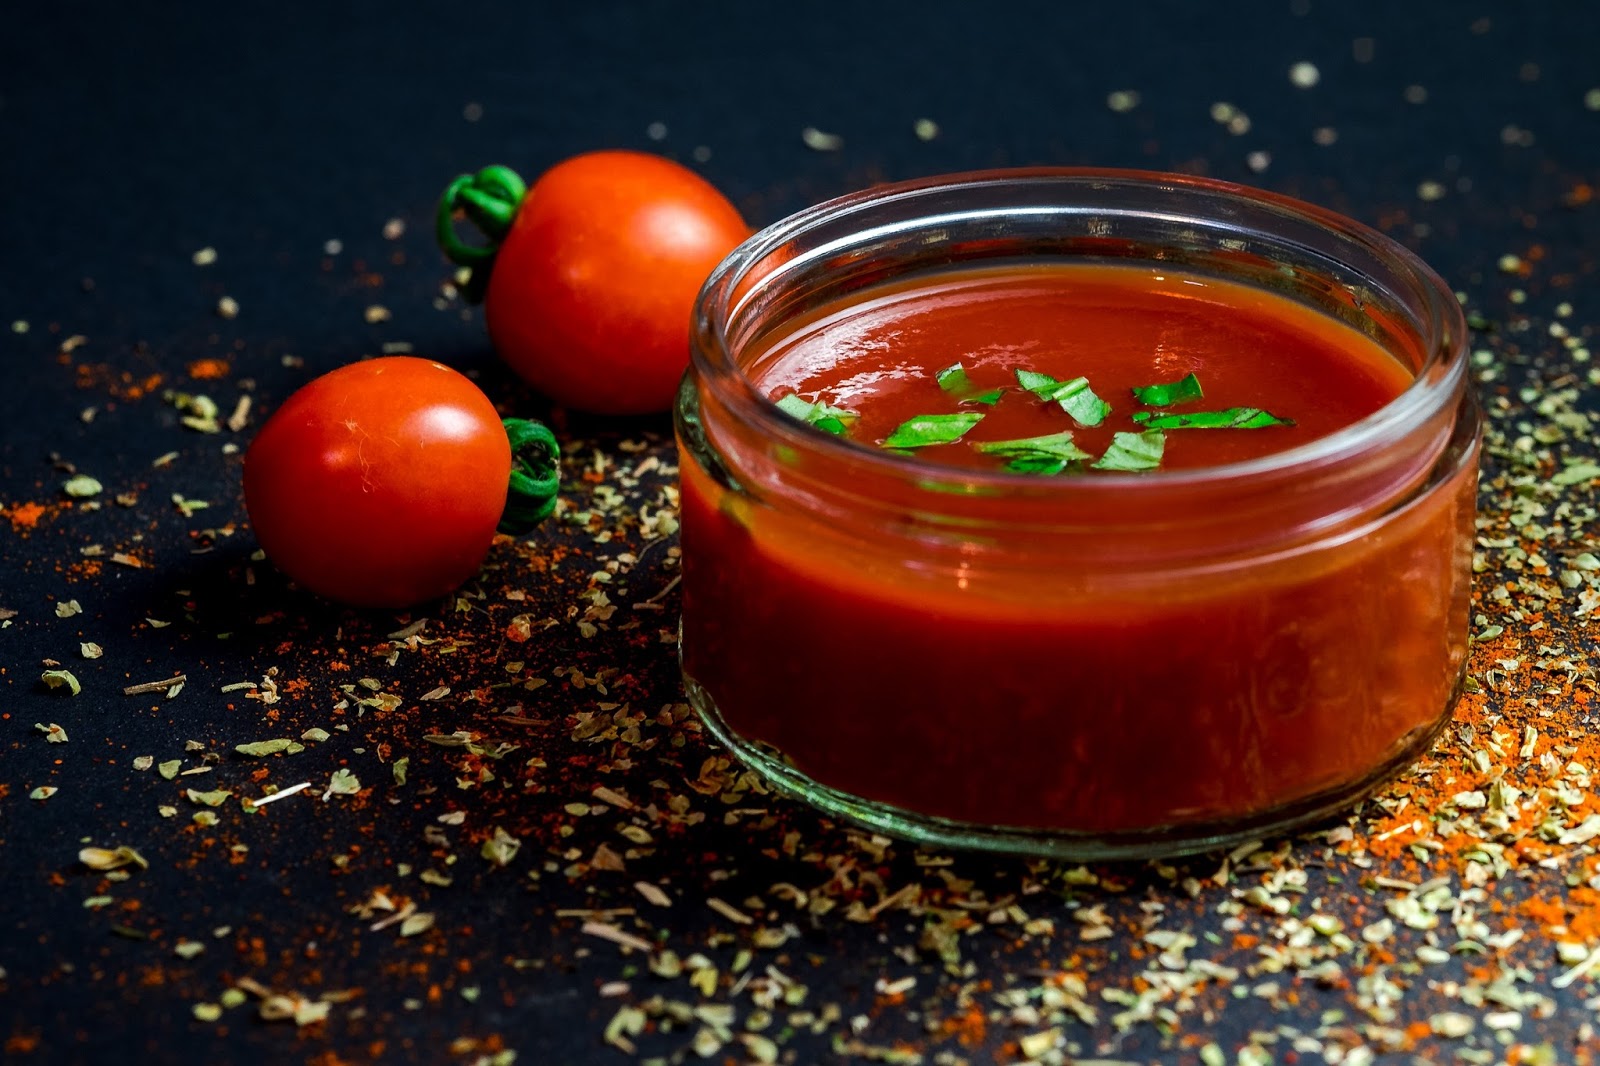 How To Make Tomato And Chilli Jam